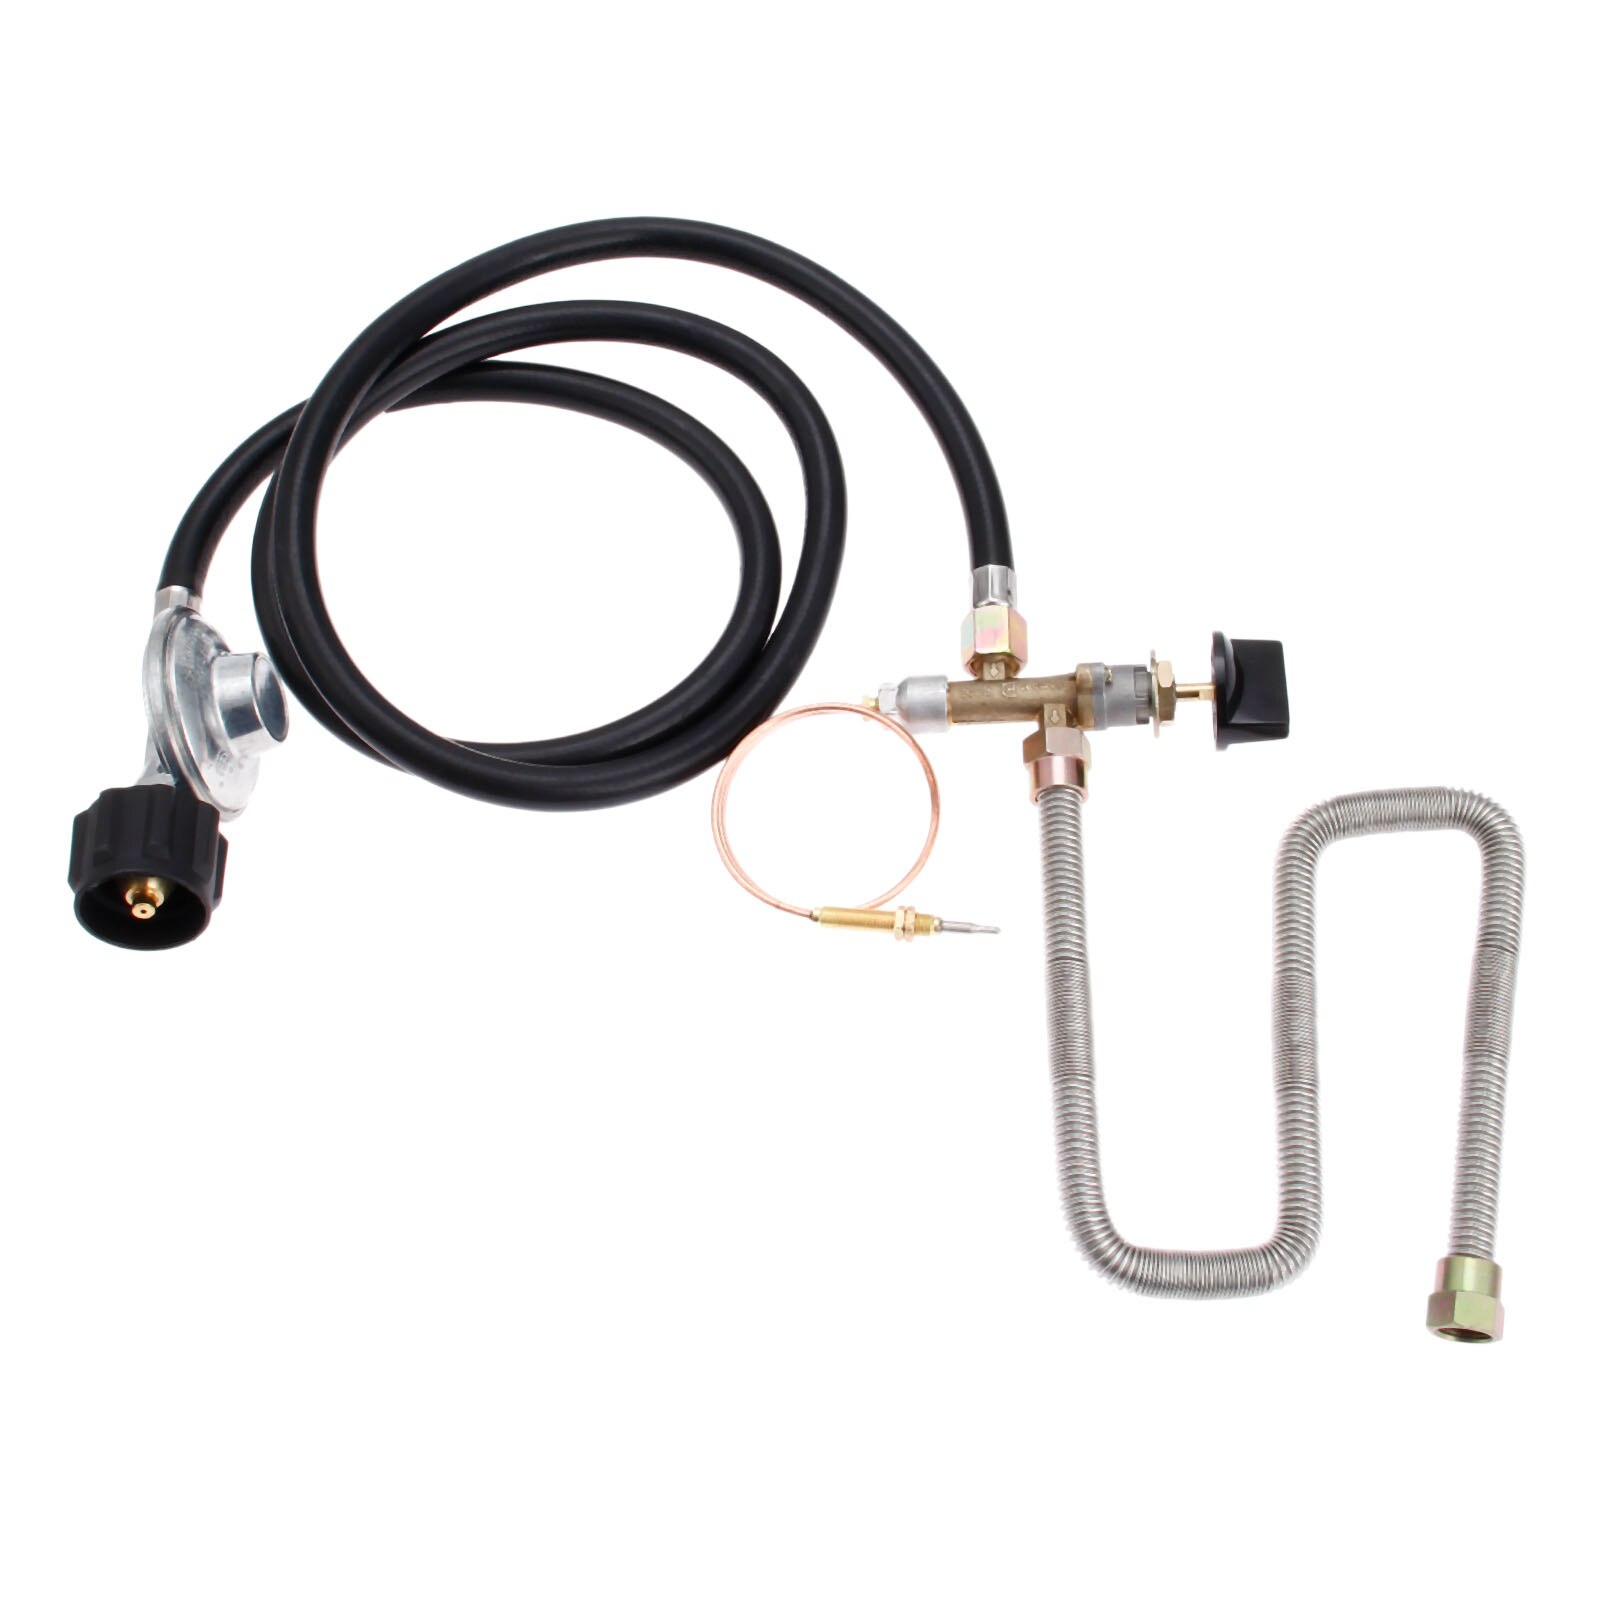 Propane Fire Pit Gas Control Valve System Regulator Kit With Hose 600mm Universal M8 Thermocouple 24inch Whister Free Flex Line